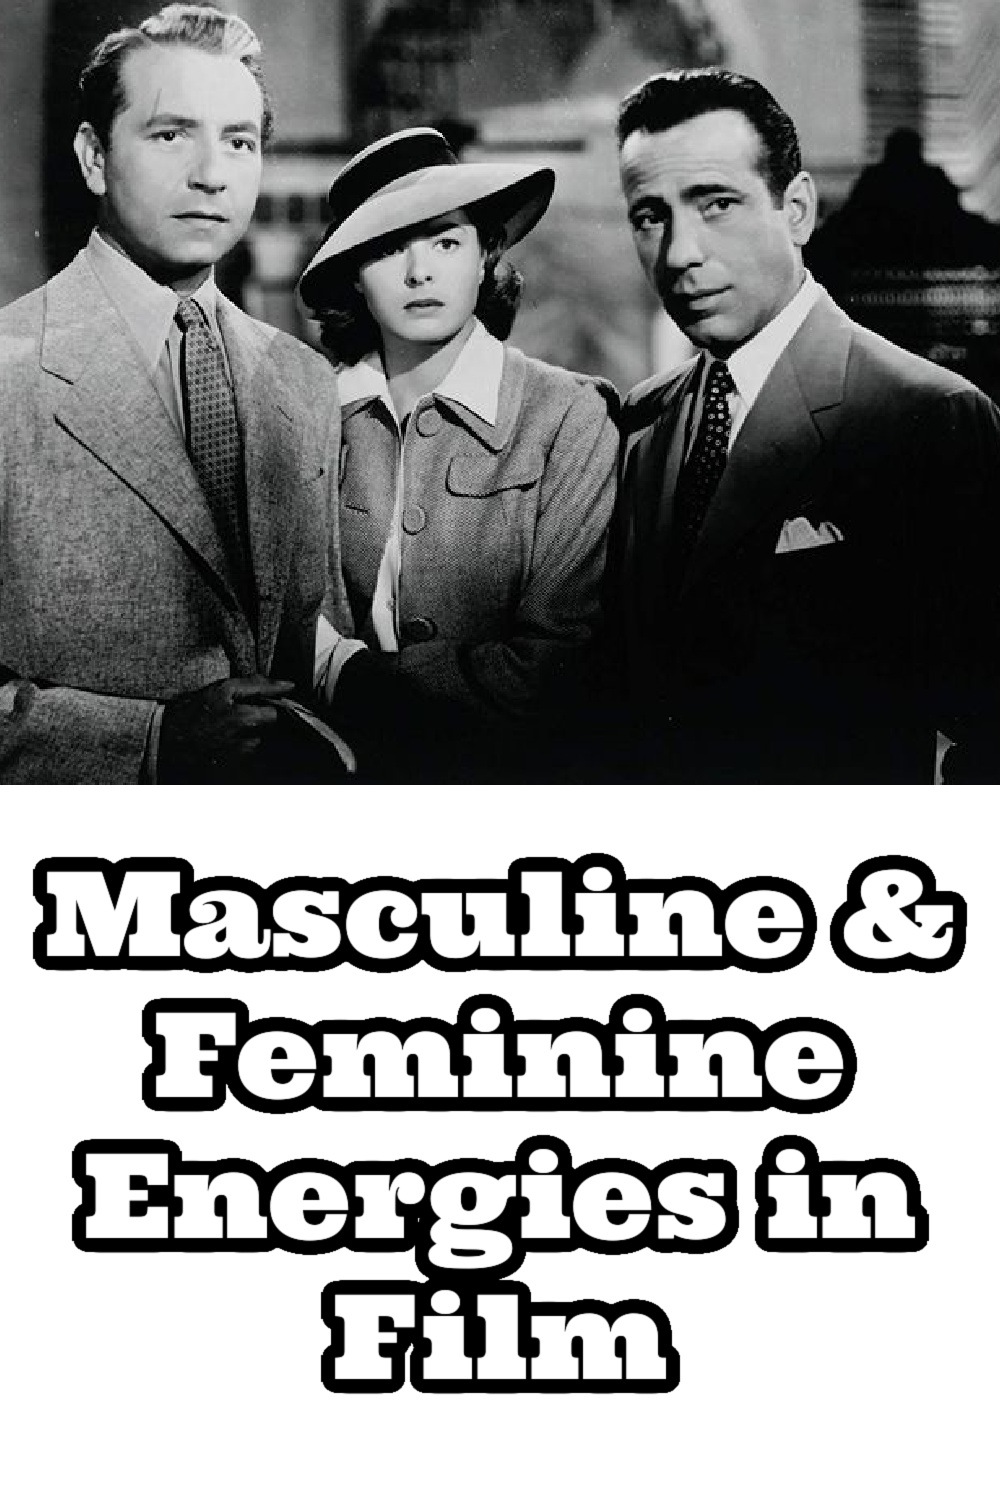 what feminine women really want, casablanca reaction, casablanca breakdown, masculine traits in a man, what does a masculine man wants in a woman, masculine energy in a relationship, wounded femininity in men, wounded feminine energy traits, wounded feminine and masculine, wounded feminine energy in a man, how to create polarity in relationships, passive men, masculine and feminine examples, feminine films, femininity in movies, understanding masculine and feminine energy, understanding masculine and feminine energy beginners guide, feminine and masculine energy in relationships, difference between feminine and masculine energy, divine masculine and feminine healing energy, feminine energy, feminine and masculine energy balance, feminine and masculine energy traits, feminine masculine energy, feminine energy vs masculine energy, masculine energy, masculine energy vs feminine energy, masculine vs feminine, Everyday starlet, sarah blodgett,